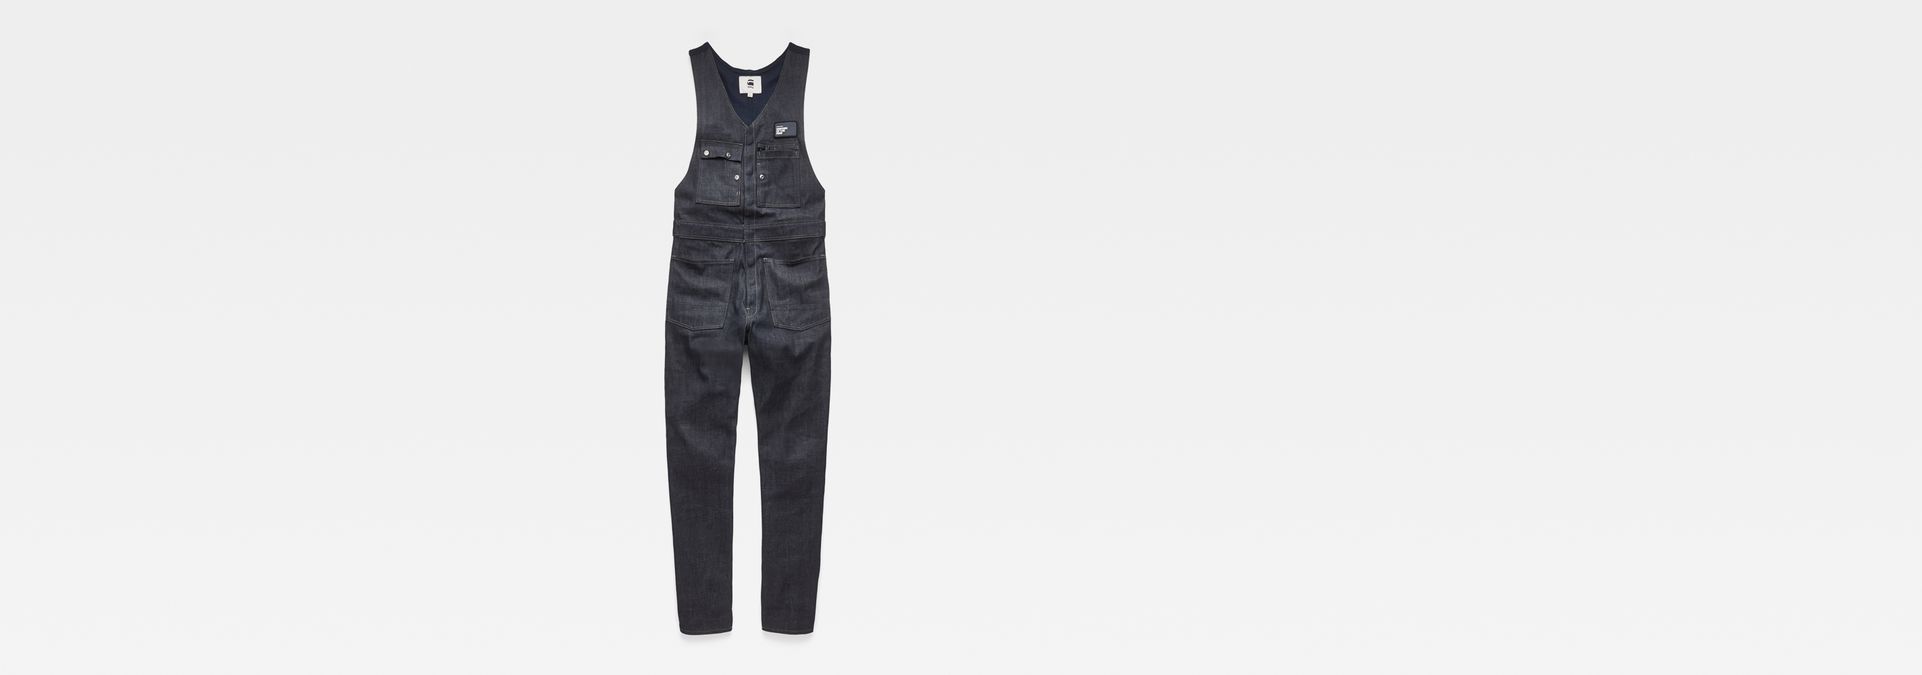 g star dungarees